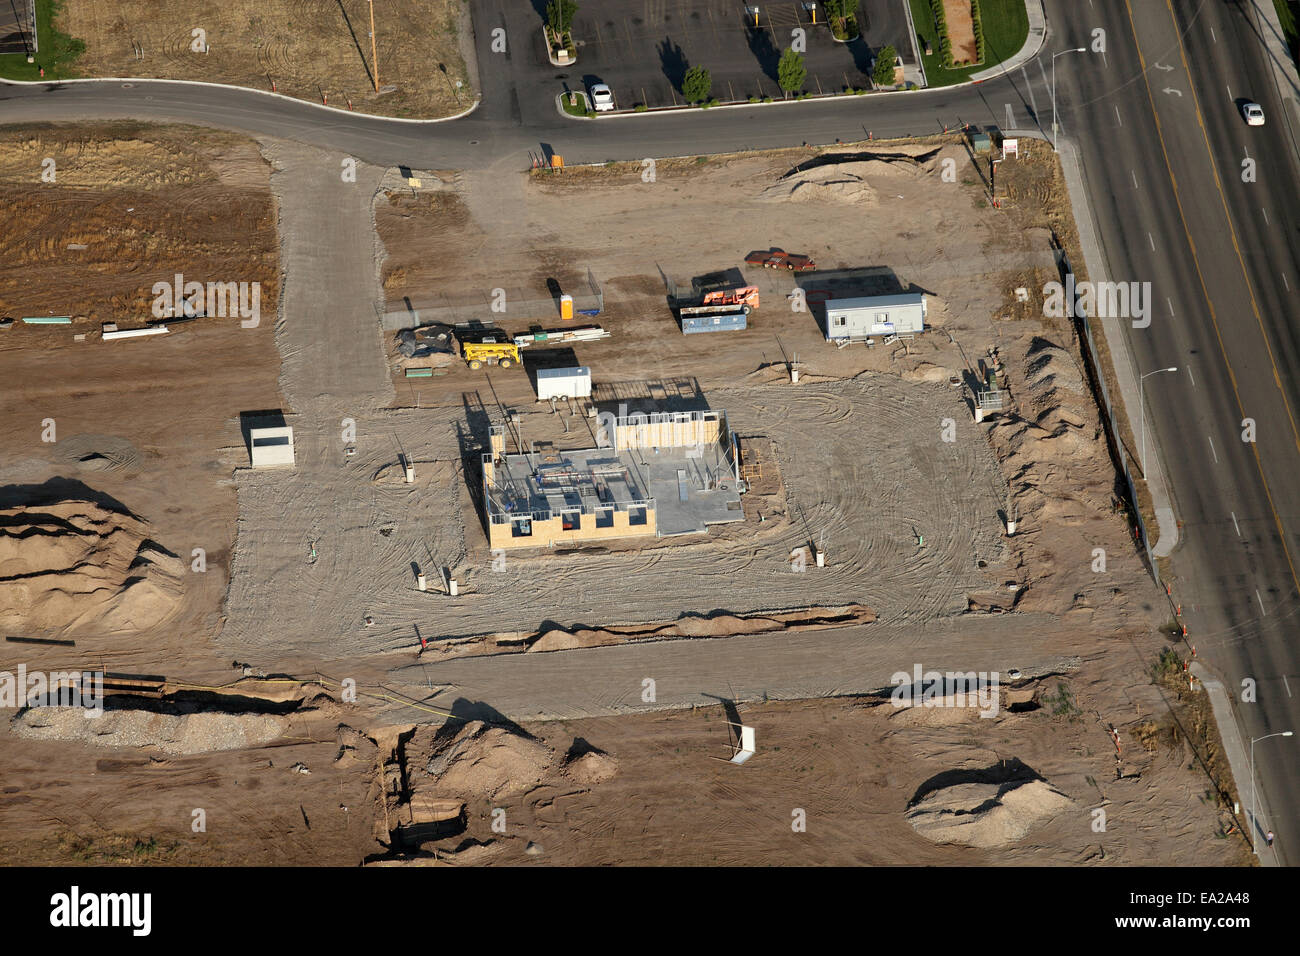 An aerial image of a commercial real estate development under construction Stock Photo